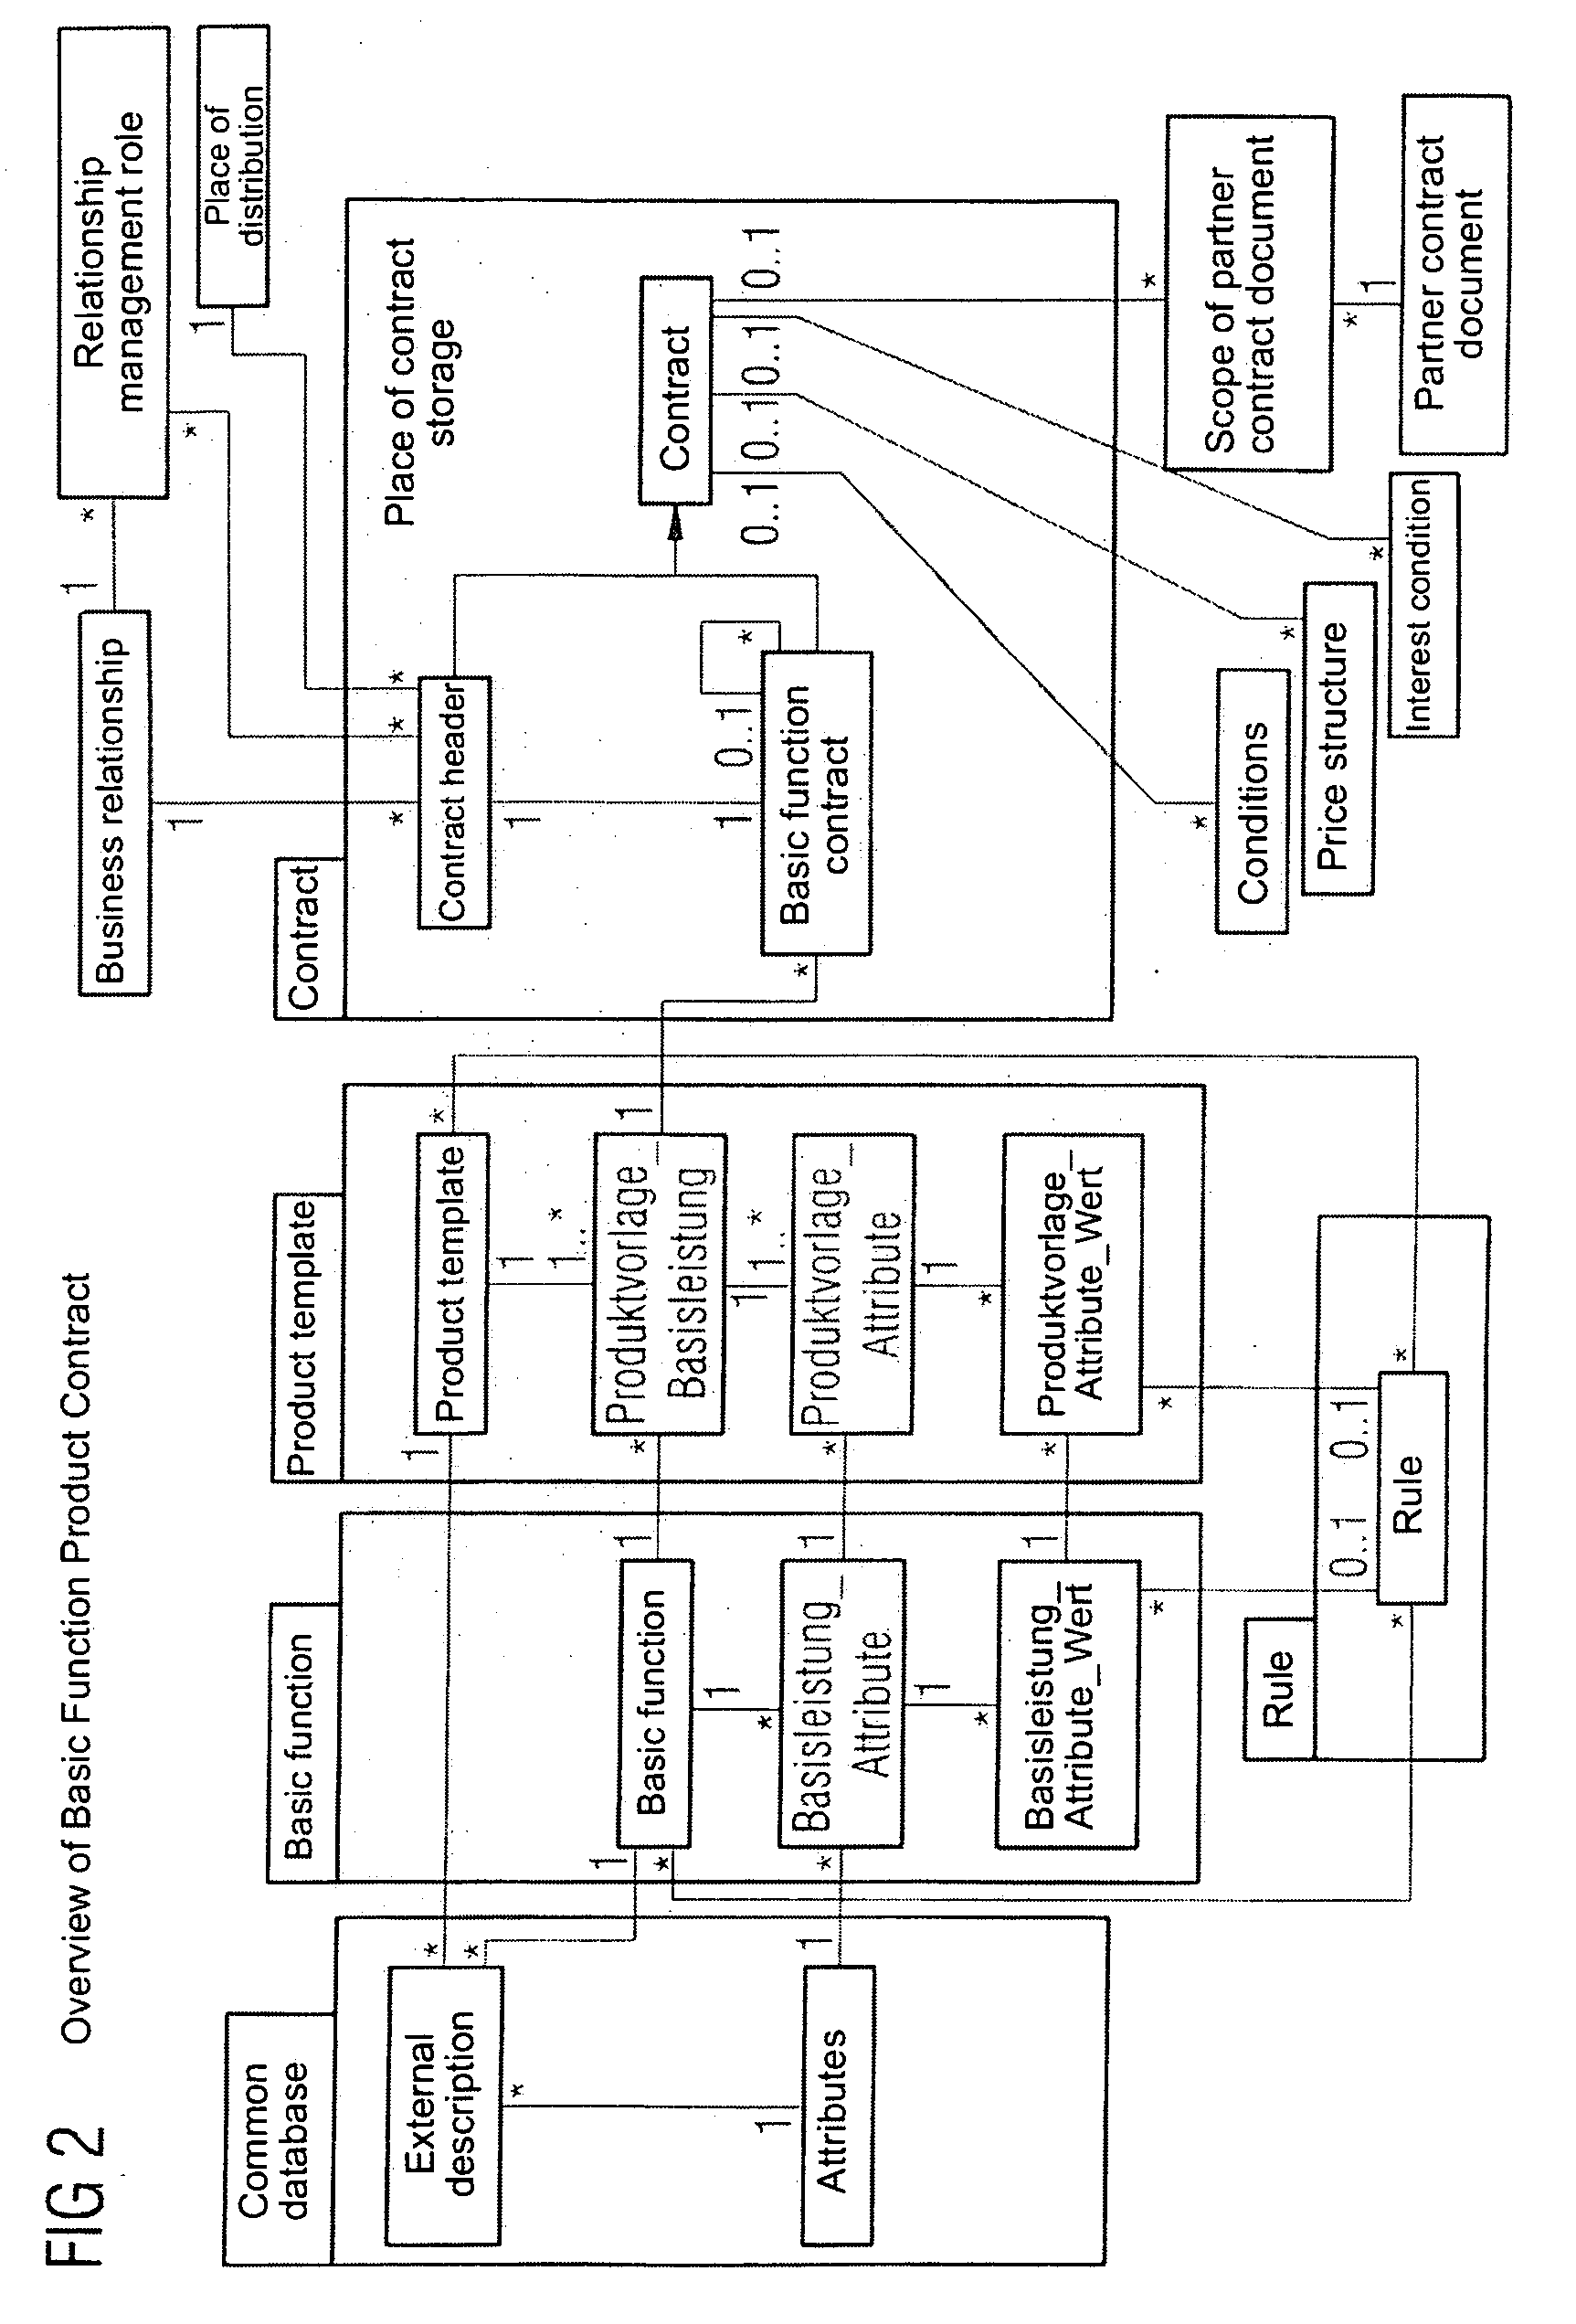 Computer-Implemented System for Producing, Processing and Managing Structured Data Sets